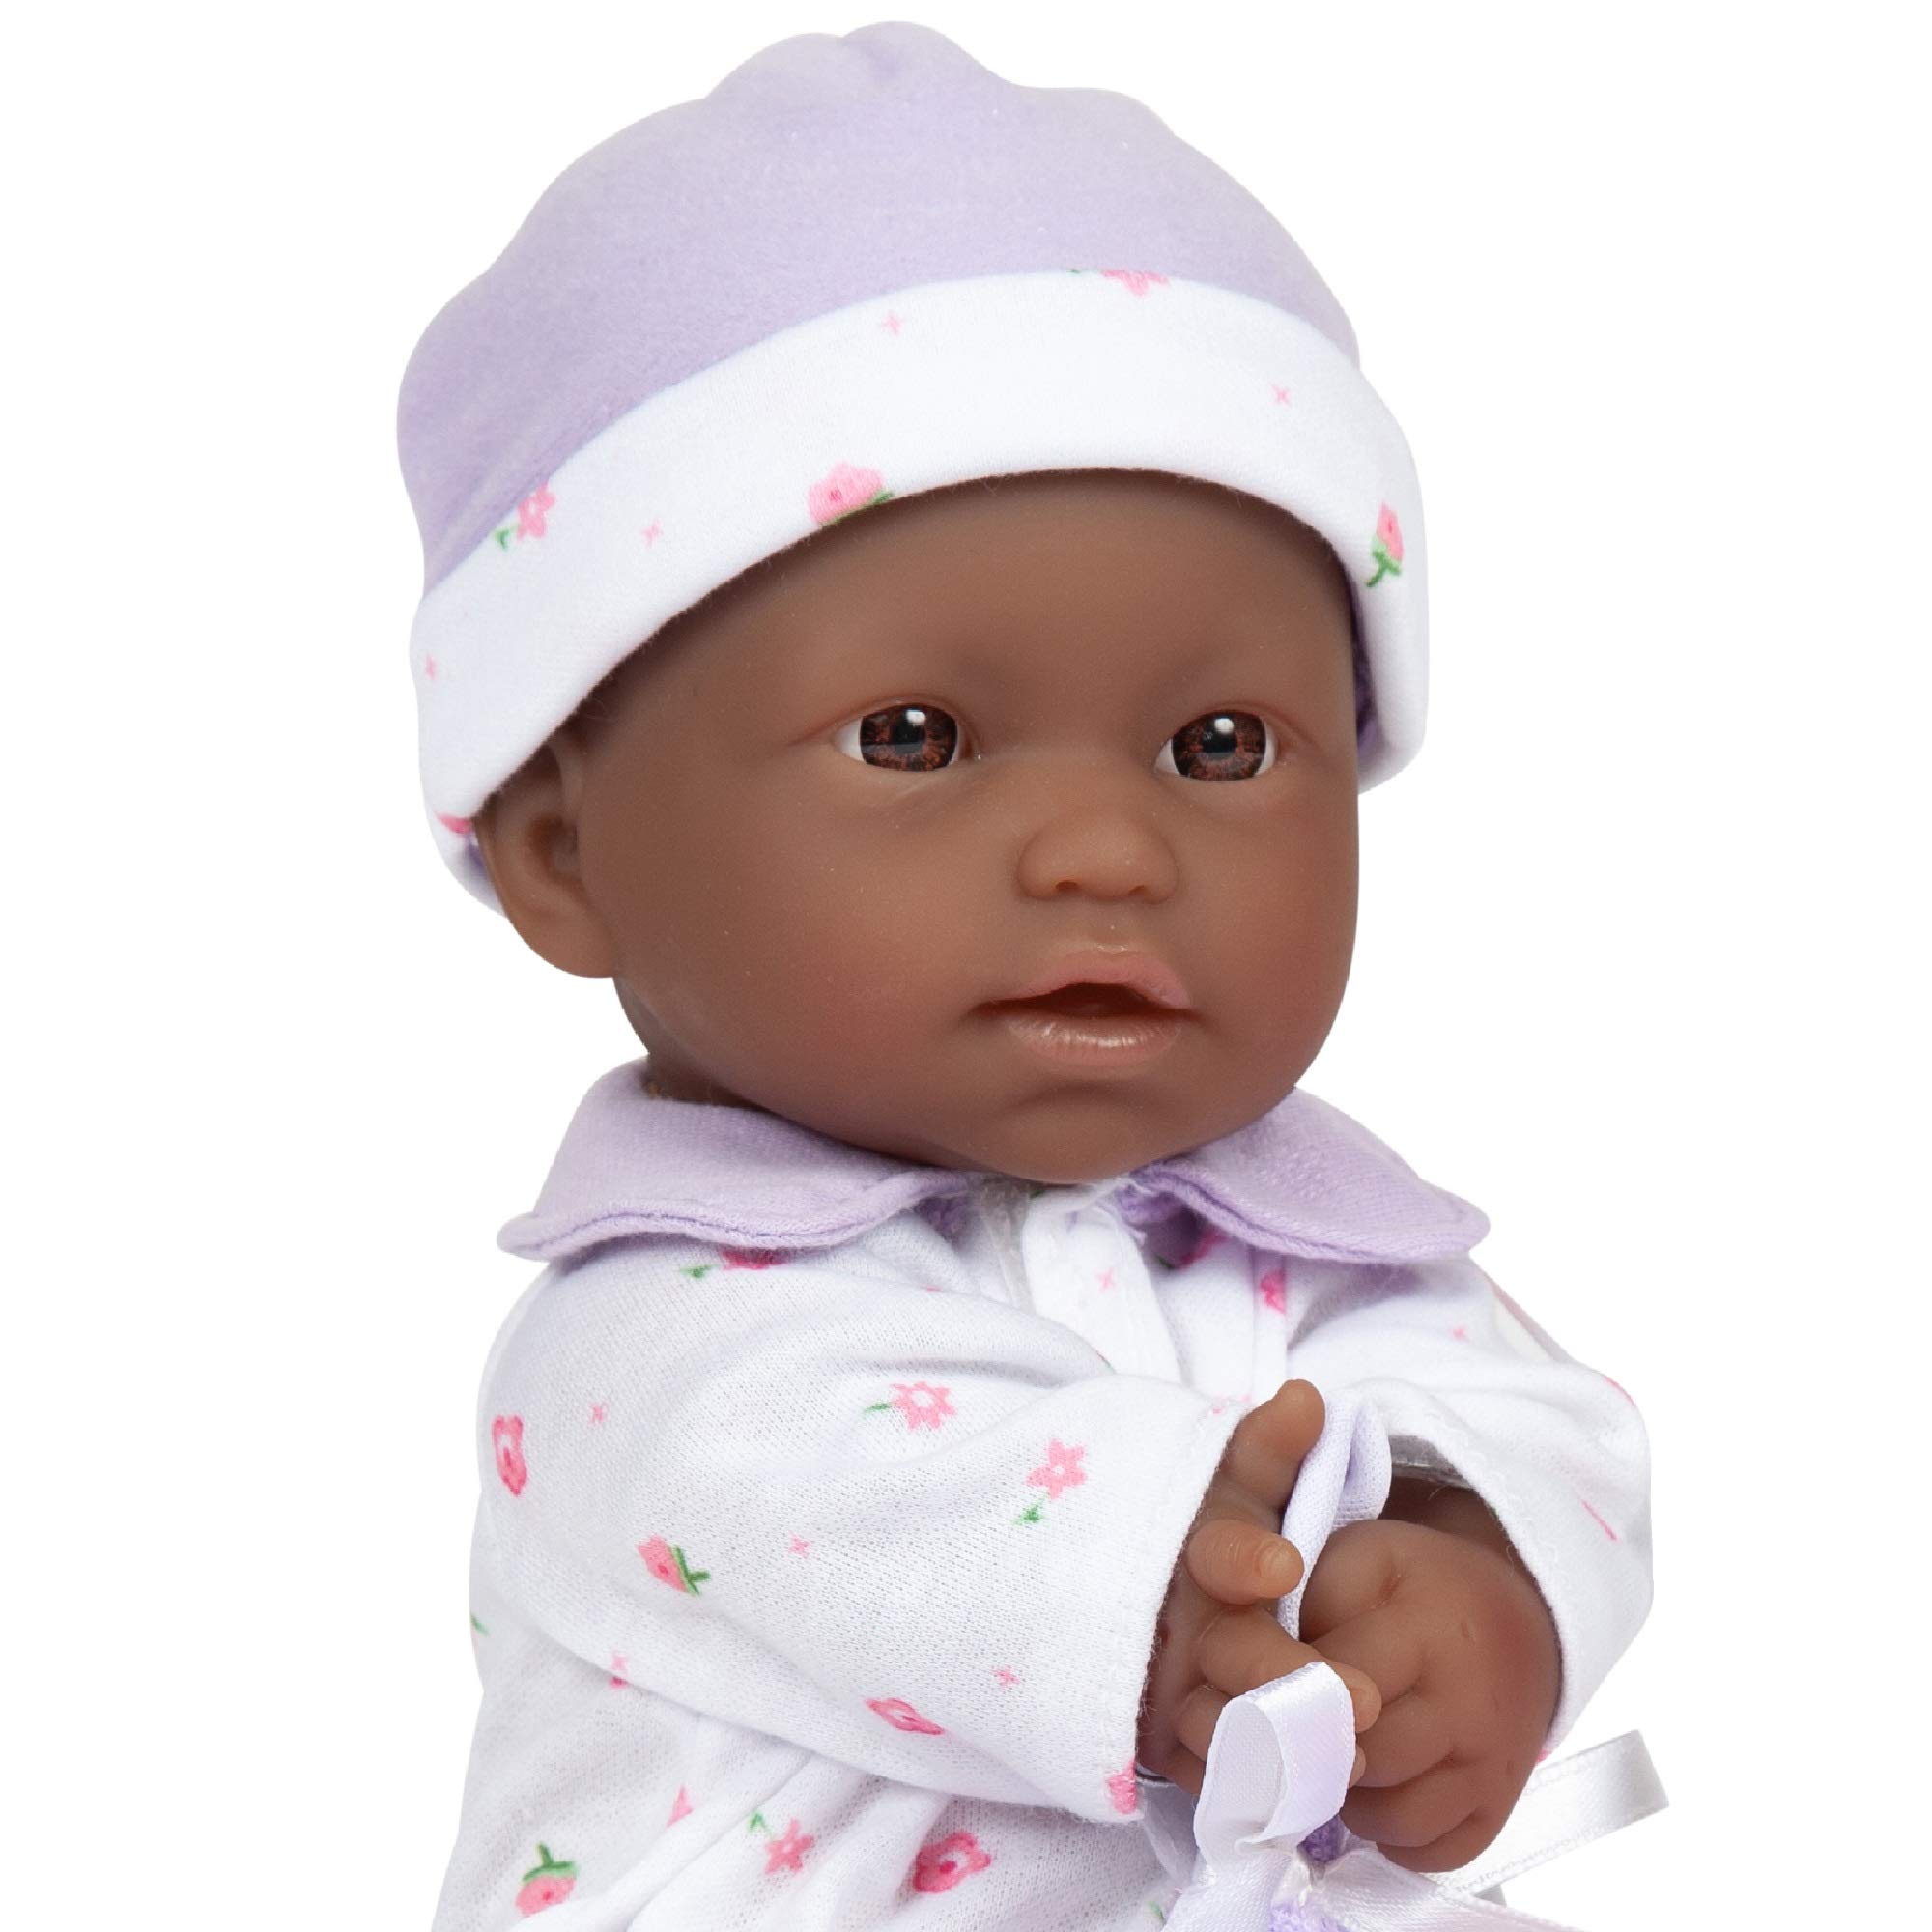 JC Toys La Baby Boutique African American 11 inch Small Soft Body Baby Doll dressed in Purple for Children 12 Months and older